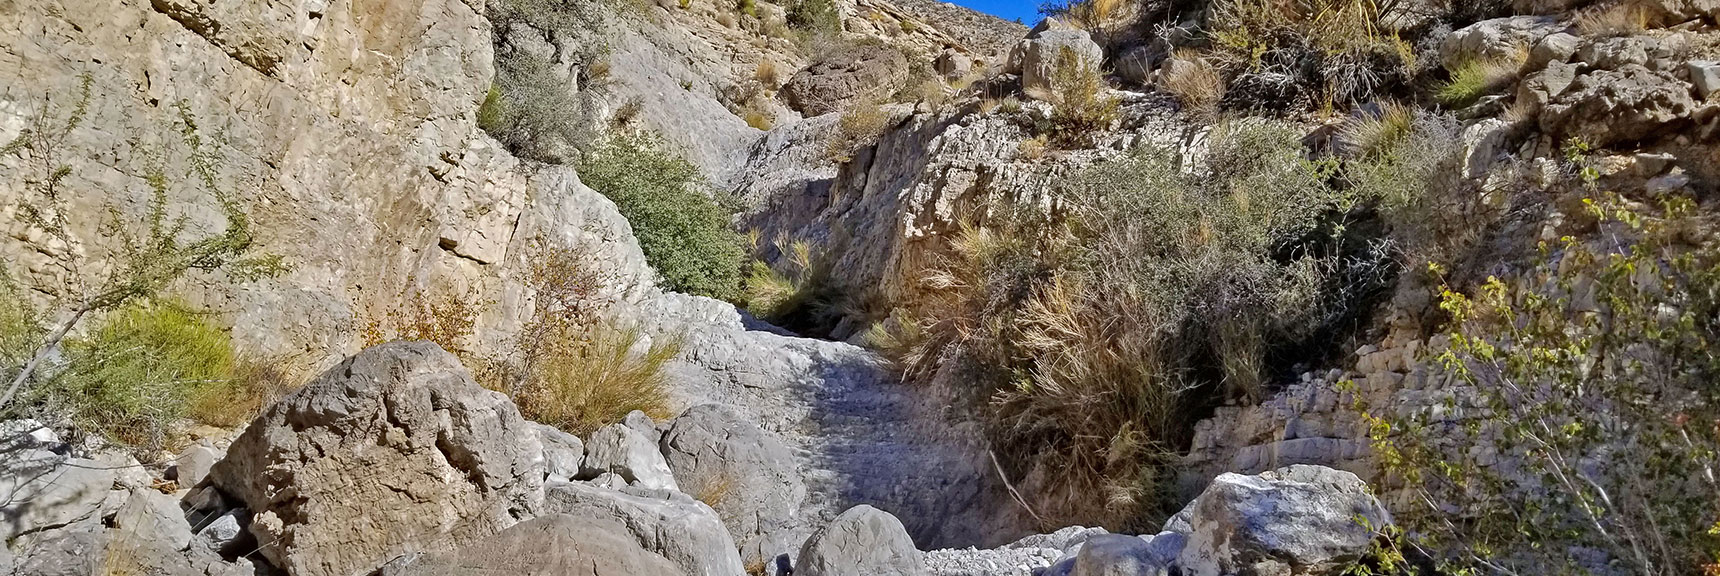 The Net Dry Waterfall Obstacle to Navigate. Deeper Than It Looks! | Kraft Mountain, Gateway Canyon Loop, Calico Basin, Nevada